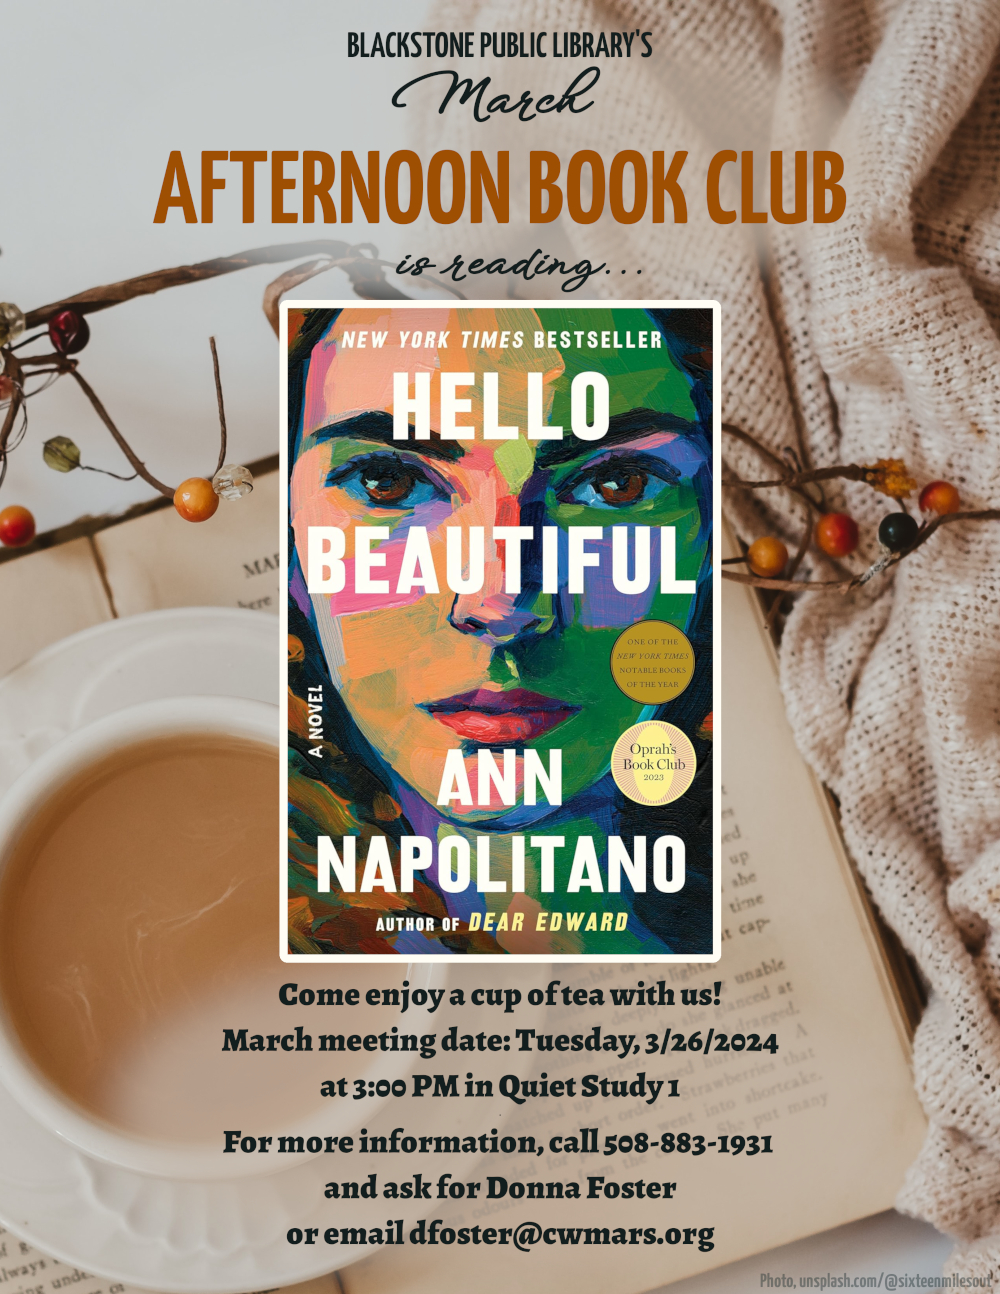 Blackstone Public Library’s March Afternoon Book Club is reading "Hello Beautiful" a novel by Ann Napolitano.  Come enjoy a cup of tea with us! March meeting date: Tuesday, 3/26/2024 at 3:00 PM in Quiet Study 1.  Image description: The book text is in a bold white sans-serif font, placed over the painting of a woman's face. The painting is done in a bold style with colors ranging from pale peach, to green tones for her skin where it is in shadow. The paint strokes are visible and the colors are vibrant.  For more information, call 508-883-1931 and ask for Donna Foster, or email dfoster@cwmars.org.